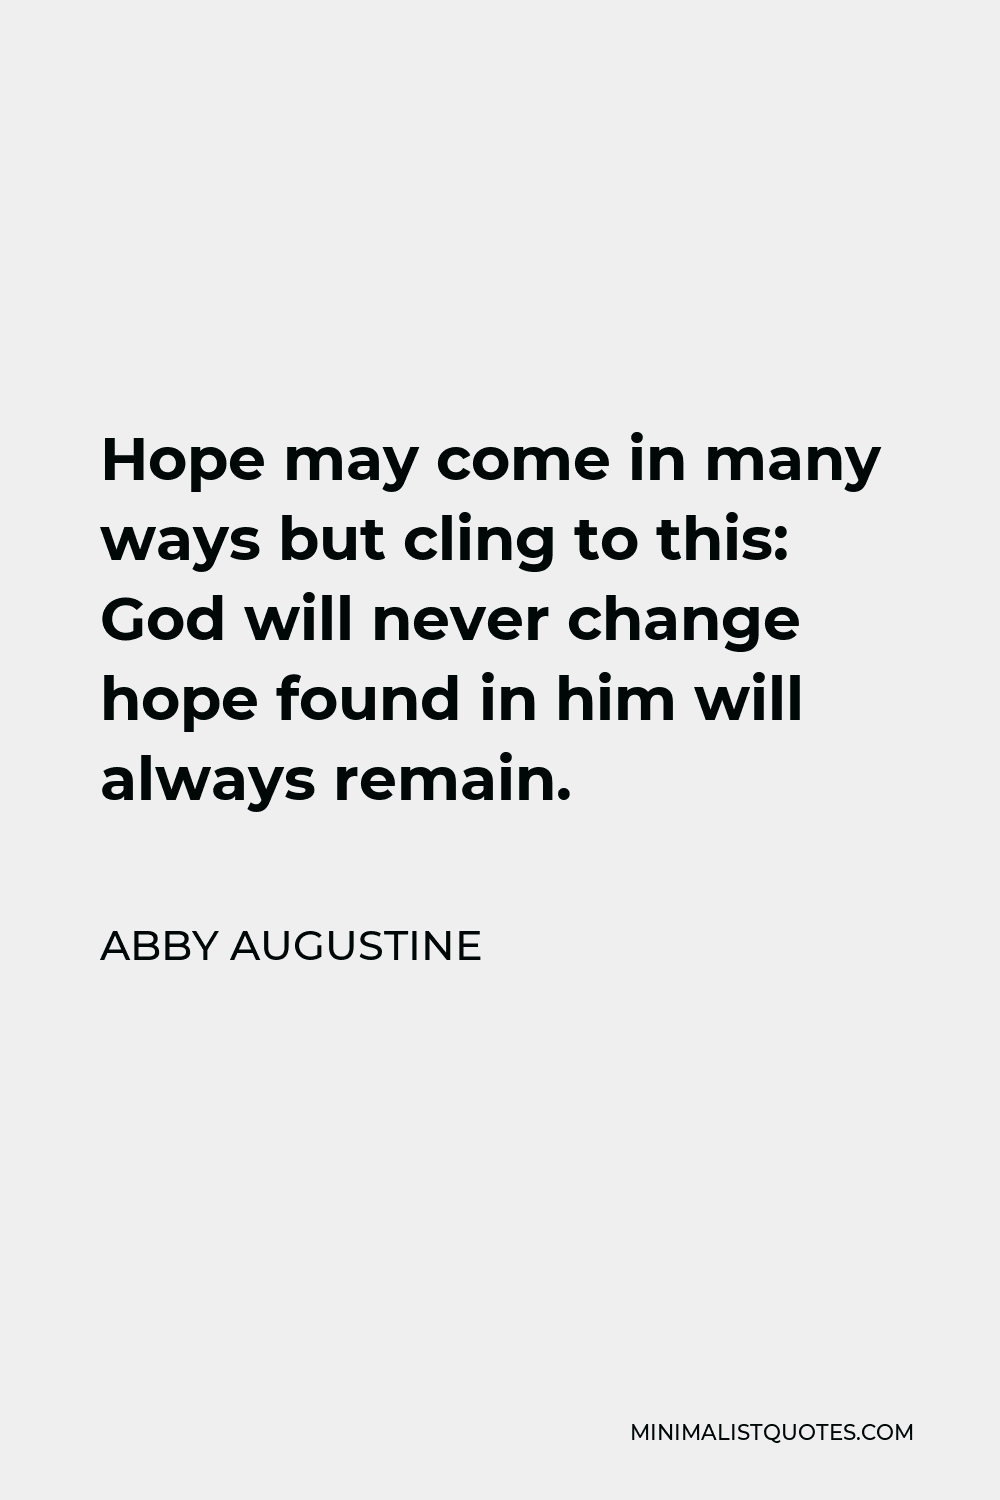 Abby Augustine Quote - Hope may come in many ways but cling to this: God will never change hope found in him will always remain.